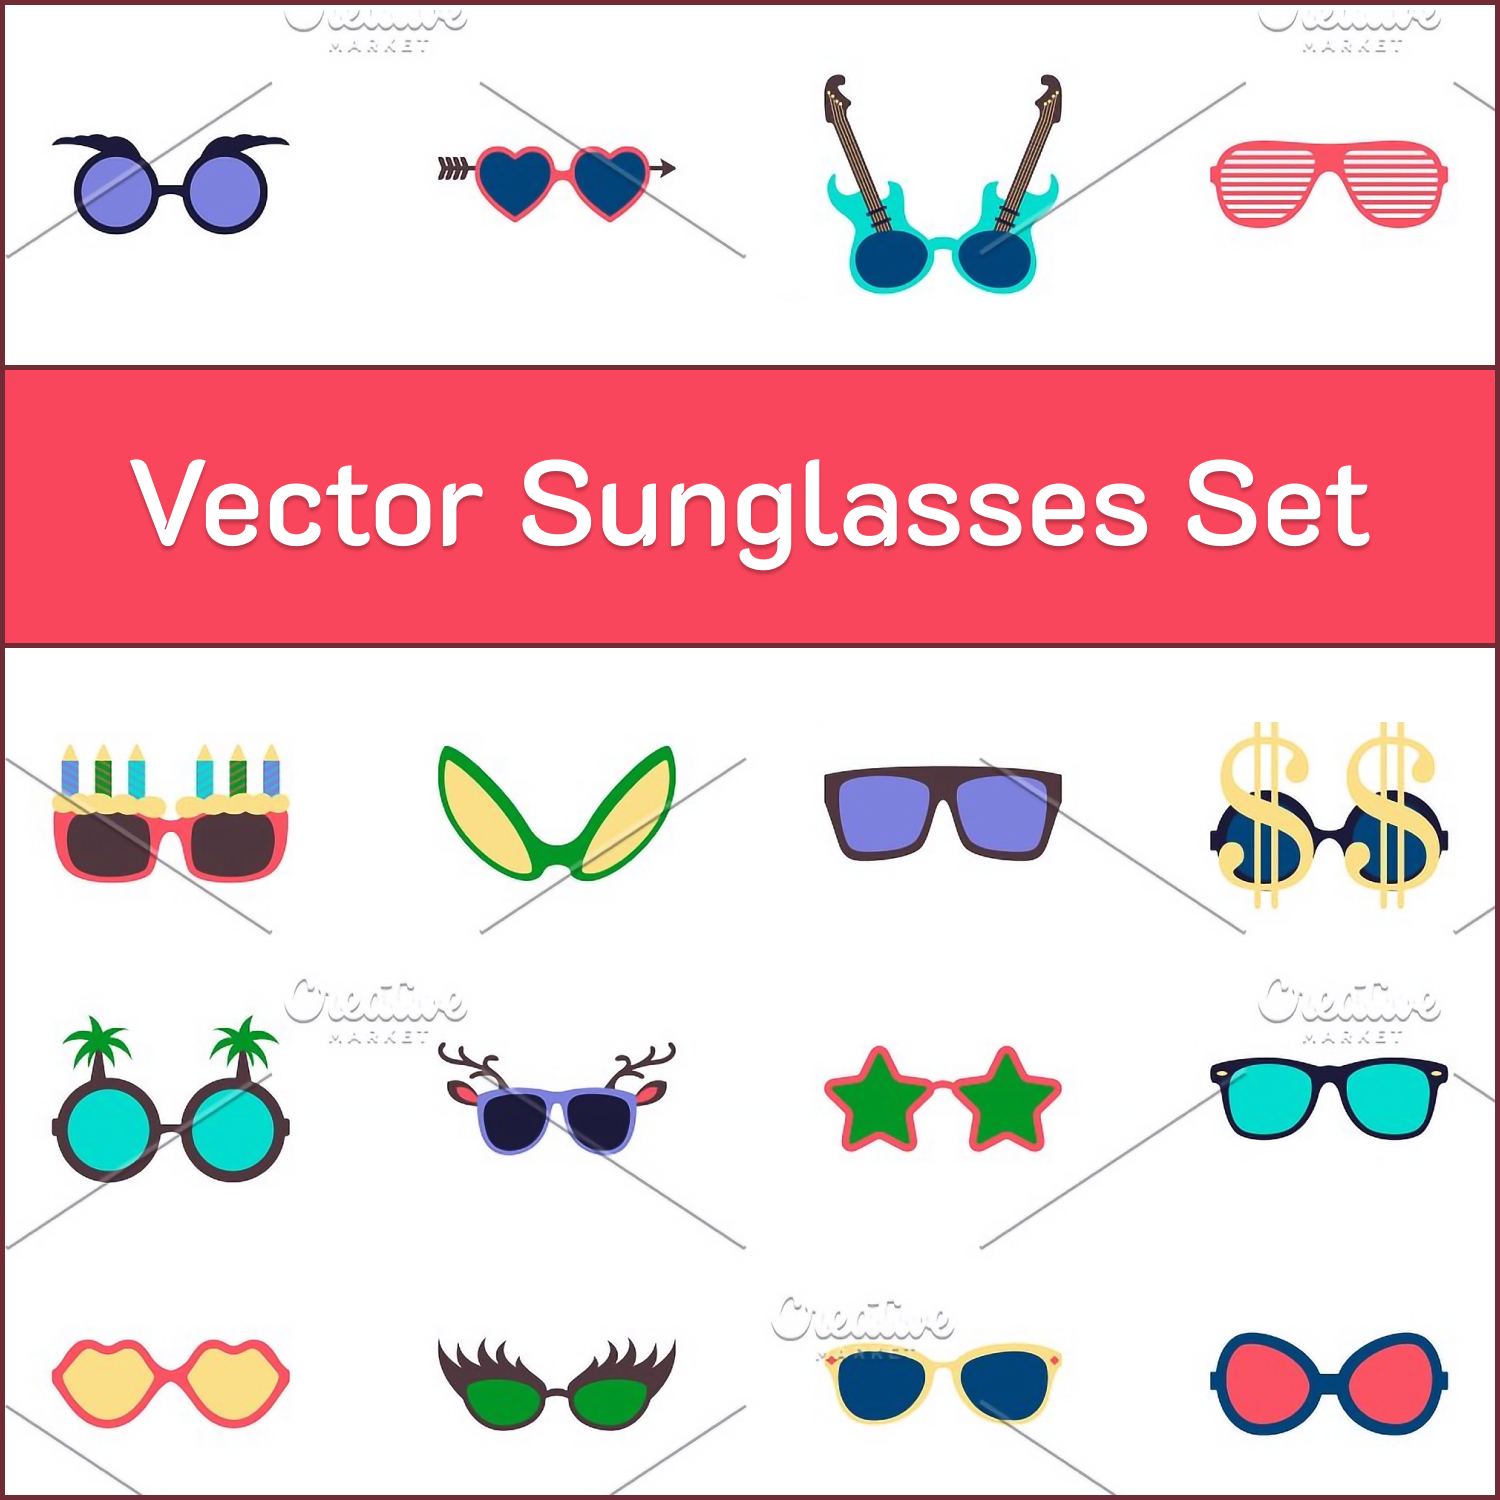 Images preview vector sunglasses set.